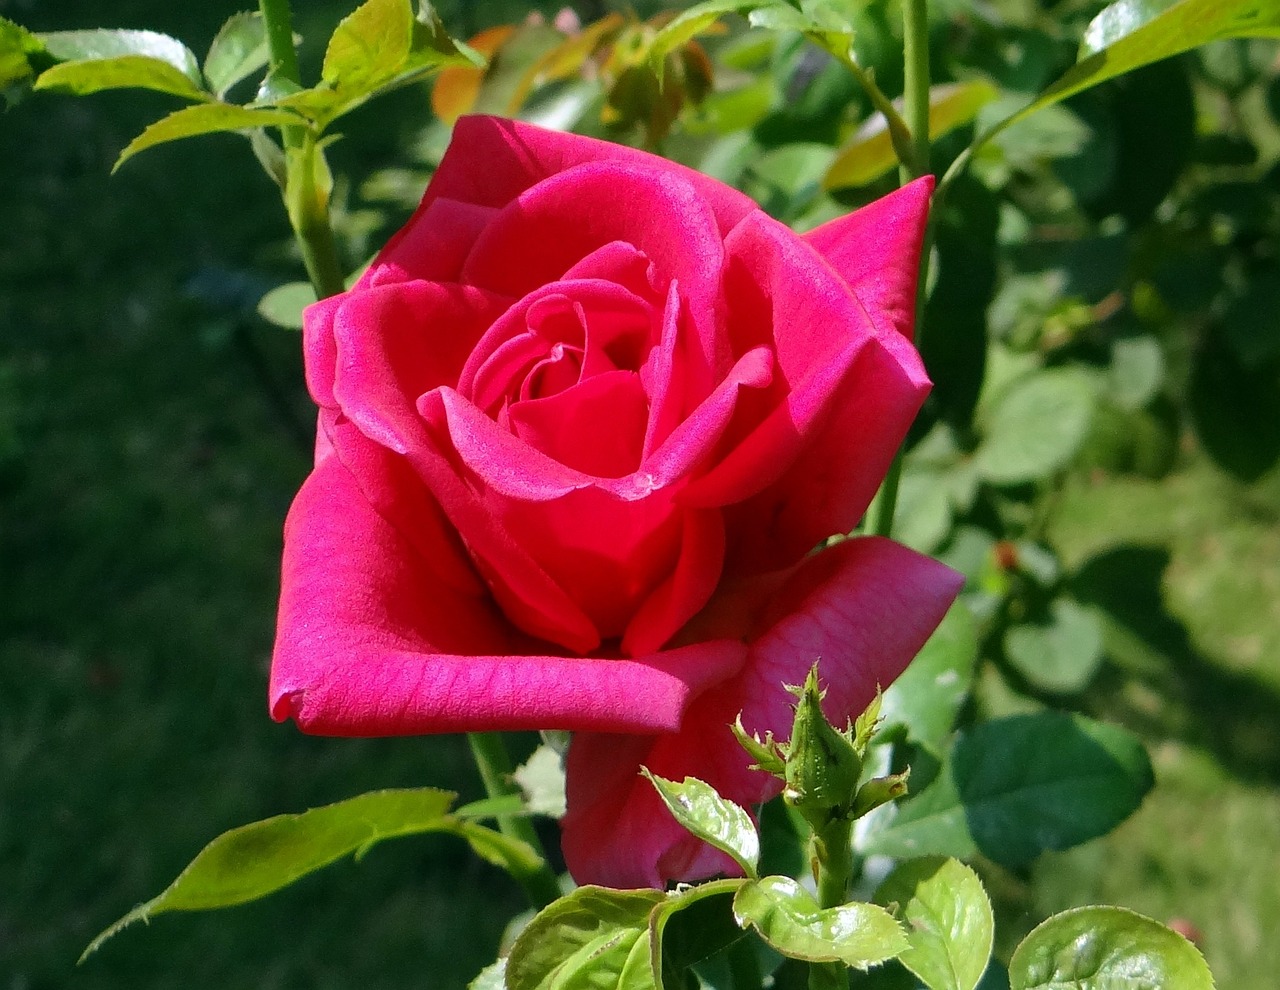 a close up of a pink rose with green leaves, in red gardens, beautiful sunny day, épaule devant pose, celebration